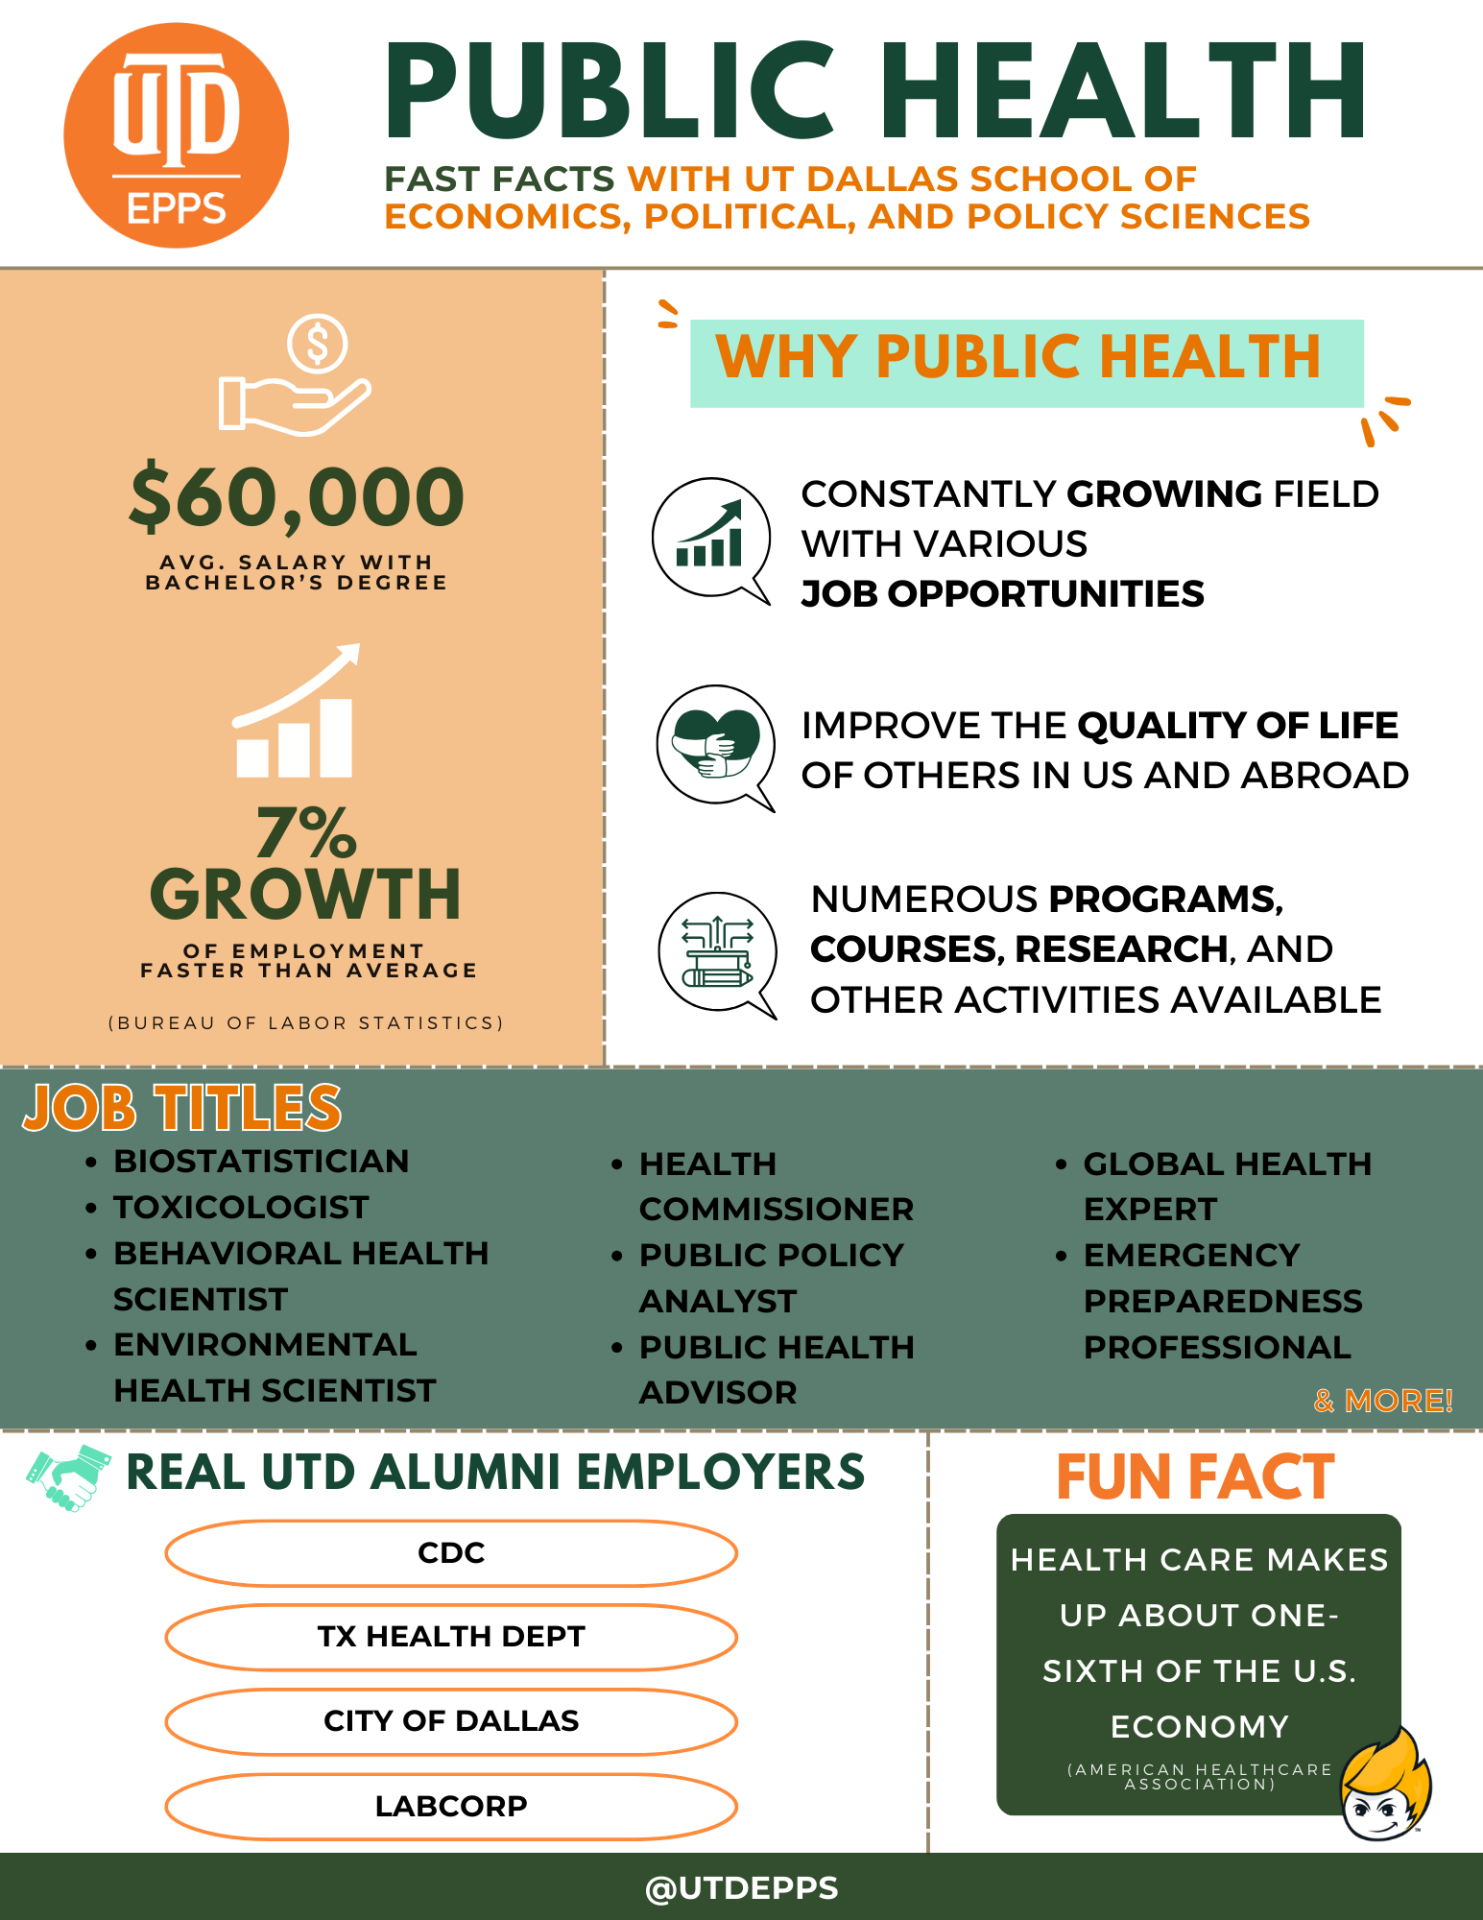 Public health
Fast Facts with Ut Dallas school of economics, political, and policy sciences

,000 is the average salary with bachelor’s degree. 7% Growth of employment, which is faster than average. Data is from the Bureau of Labor Statistics.

Why public health?
CONSTANTLY GROWING FIELD WITH VARIOUS JOB OPPORTUNITIES. 
NUMEROUS PROGRAMS, COURSES, RESEARCH, AND OTHER ACTIVITIES AVAILABLE.
IMPROVE THE QUALITY OF LIFE OF OTHERS IN US AND ABROAD.

Job titles include:
BIOSTATISTICIAN
TOXICOLOGIST
BEHAVIORAL HEALTH SCIENTIST
ENVIRONMENTAL HEALTH SCIENTIST
HEALTH COMMISSIONER
PUBLIC POLICY ANALYST
PUBLIC HEALTH ADVISOR
GLOBAL HEALTH EXPERT
EMERGENCY PREPAREDNESS PROFESSIONAL
& MORE!

FUN FACT: Health care makes up about one-sixth of the U.S. economy. Information is from American Healthcare Association.

Real UTD Alumni employers include: CDC
TX HEALTH DEPT
CITY OF DALLAS
LABCORP

@UTDEPPS
